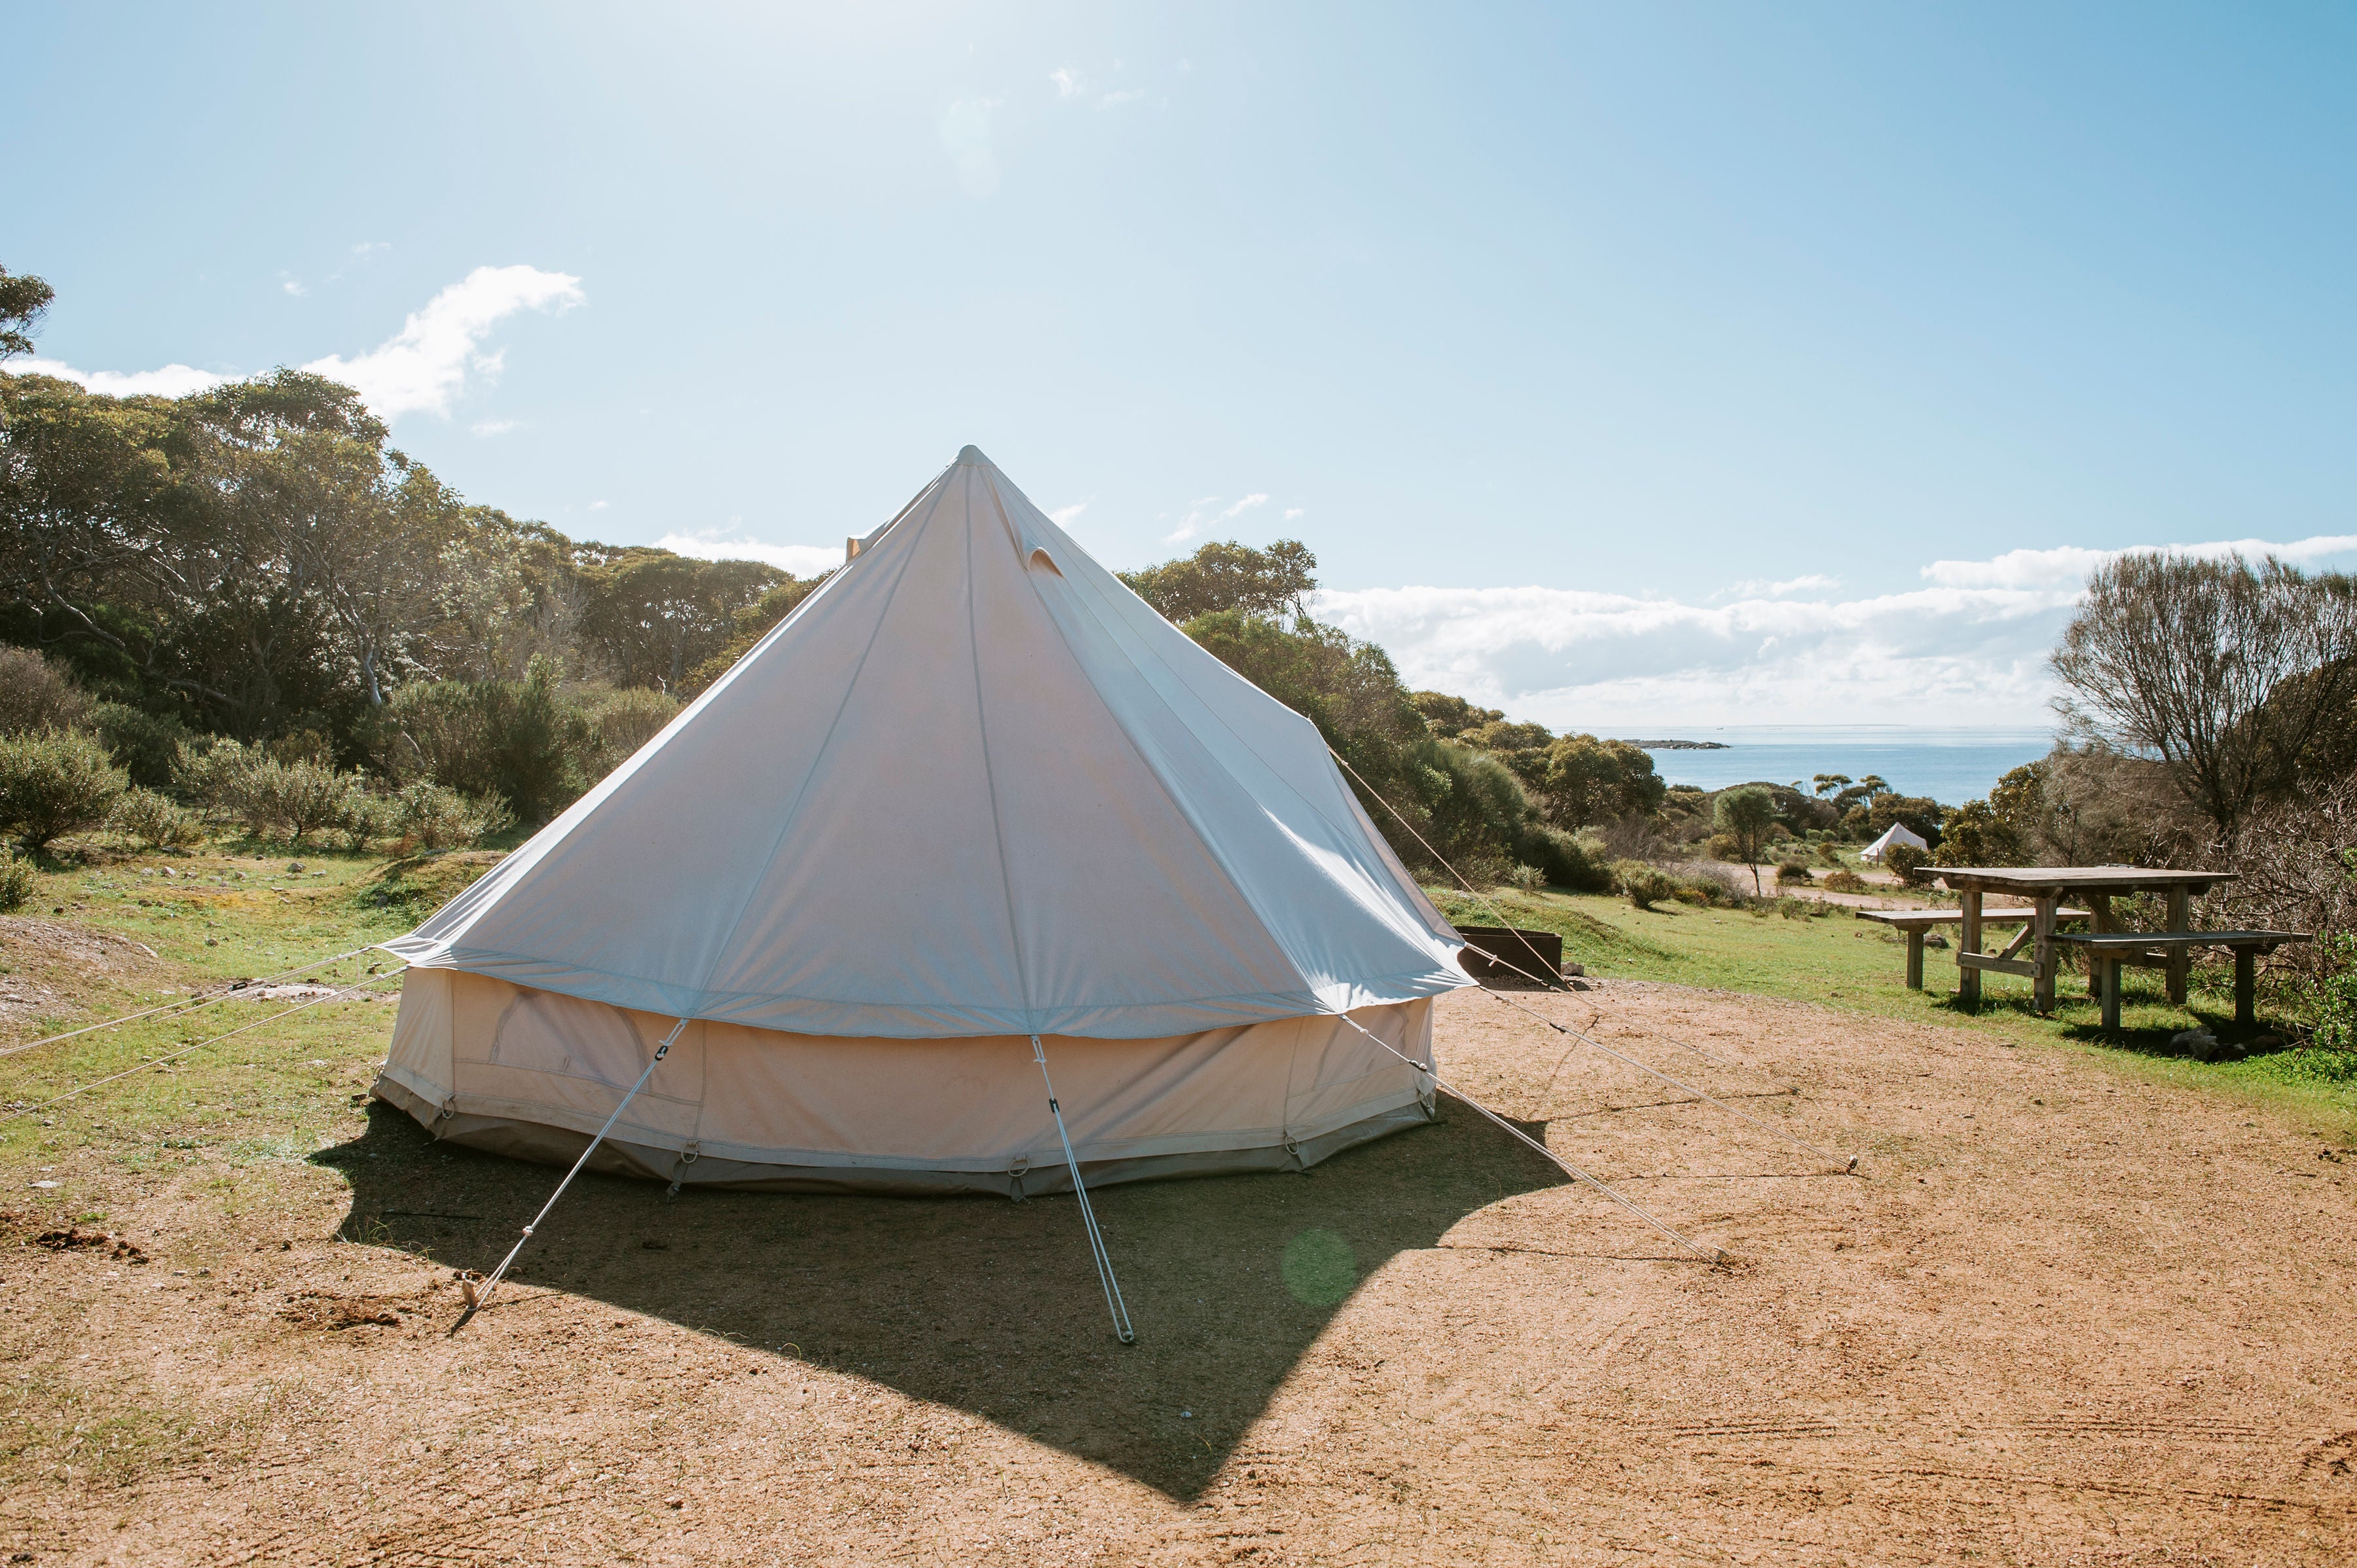 Launch Event Glamping Accommodation & Seafood Dinner SEA EAGLE SITE 5th - 6th Sept 2020 Min 2 People